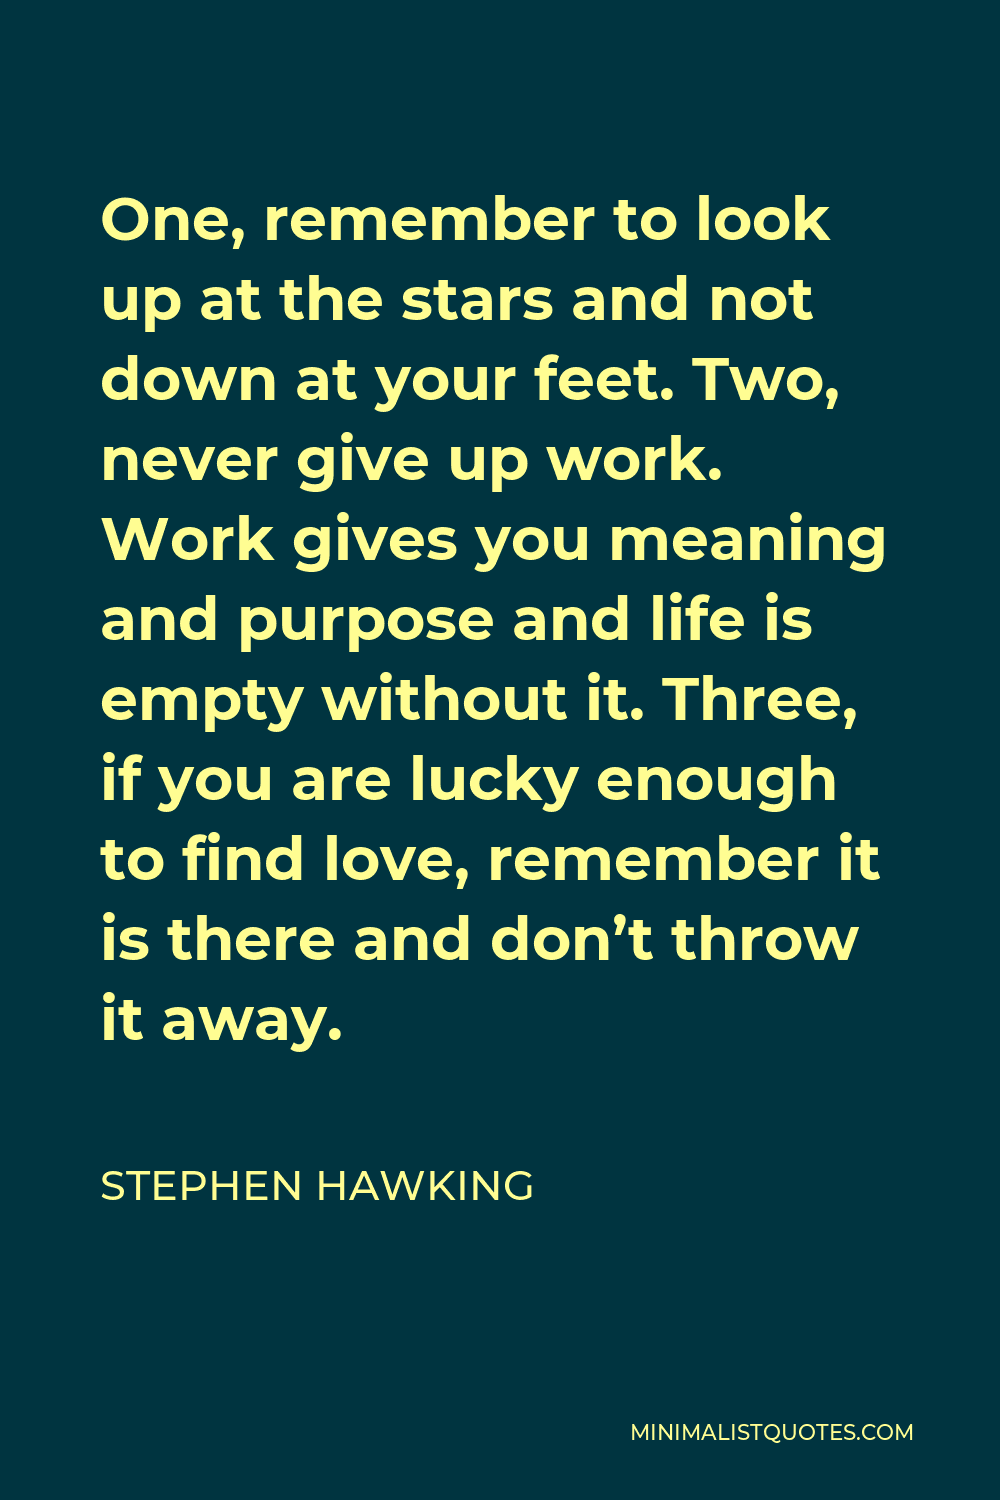 Stephen Hawking Quote - One, remember to look up at the stars and not down at your feet. Two, never give up work. Work gives you meaning and purpose and life is empty without it. Three, if you are lucky enough to find love, remember it is there and don’t throw it away.